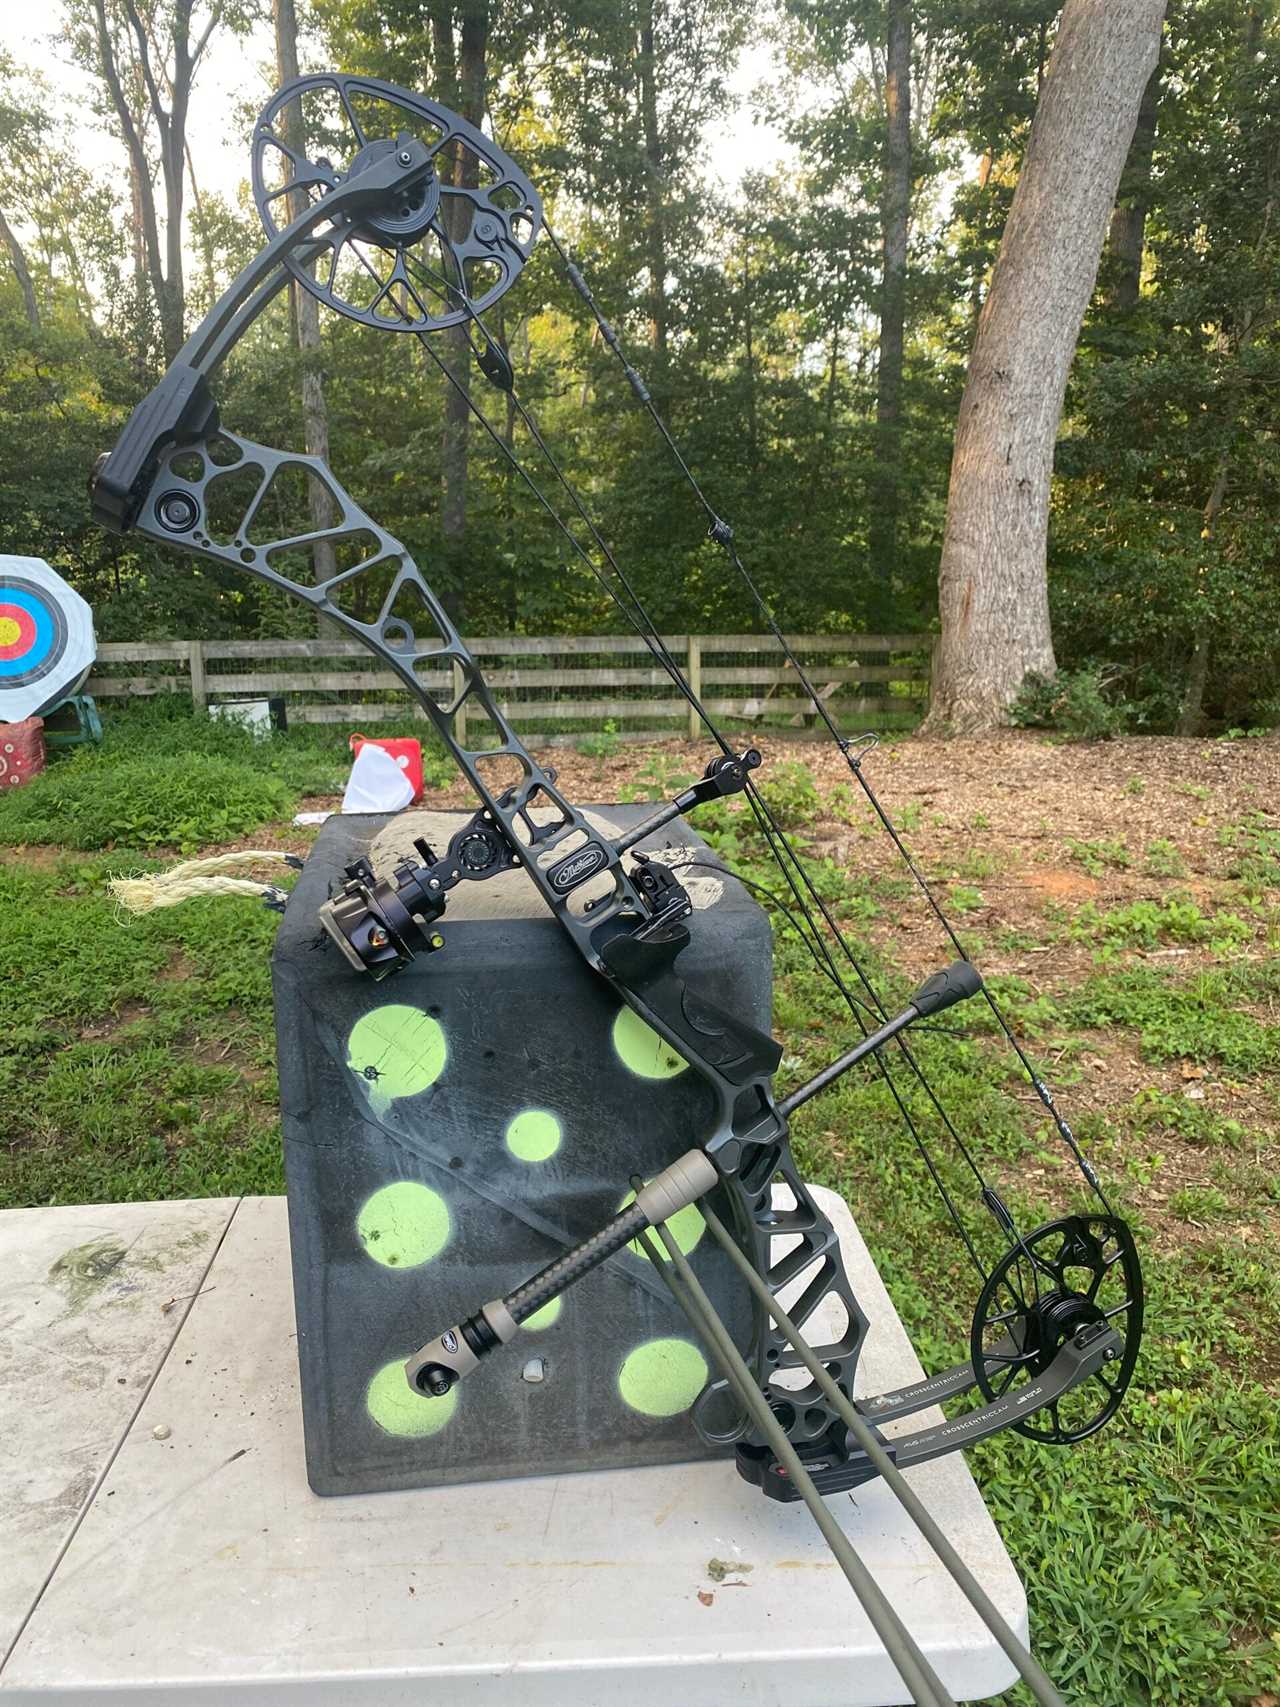 Bow used for accuracy testing leaning on target.